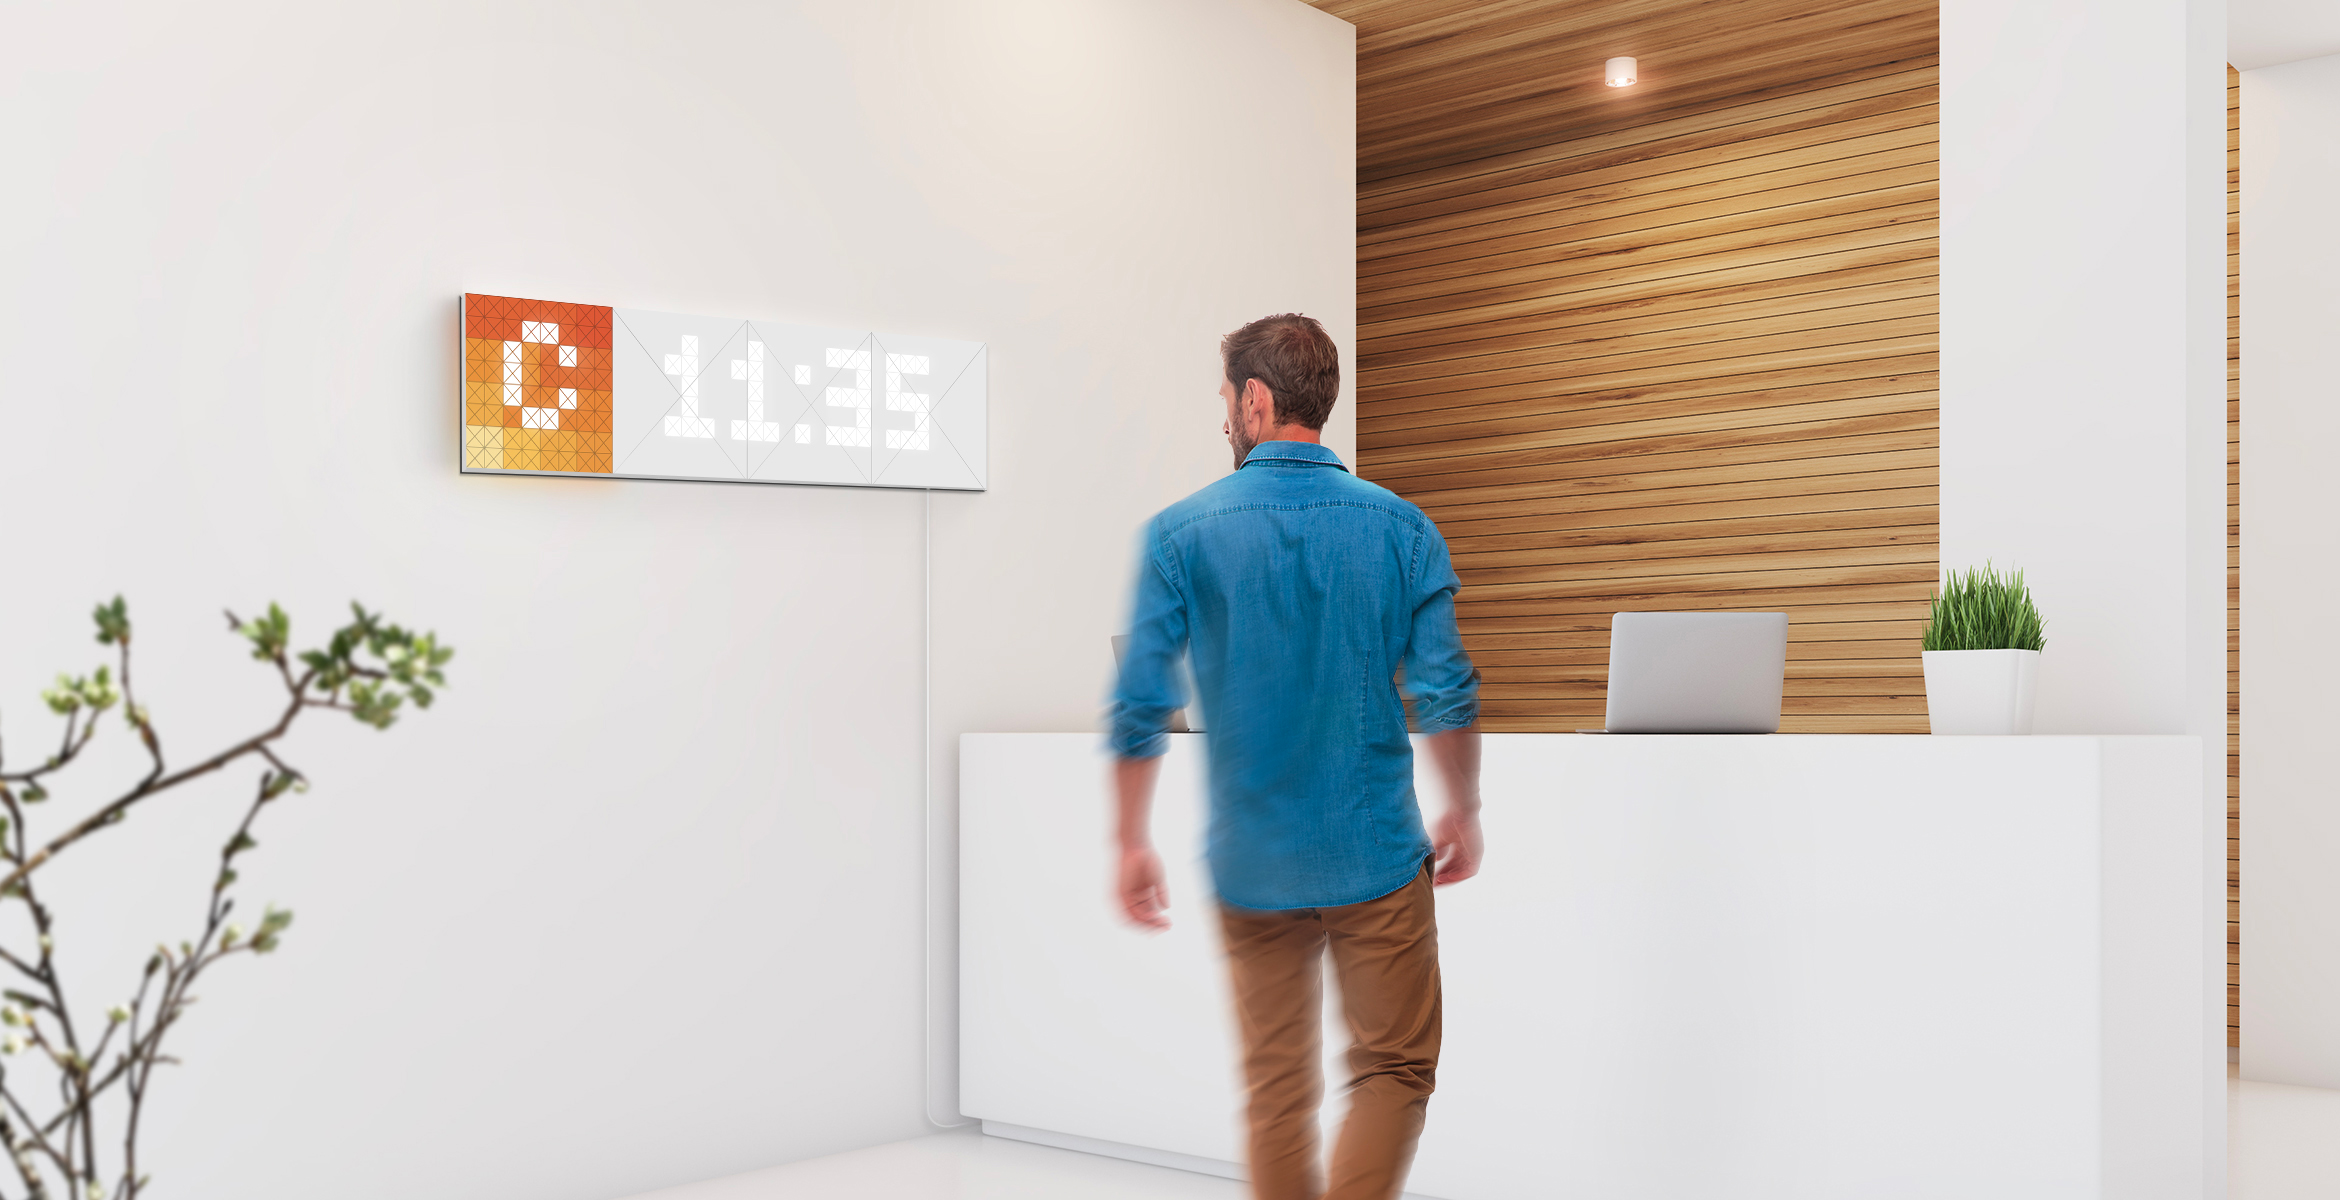 Infoscreen, assembled from 16 smart light surfaces, complements the office interior and displays time and company logo 